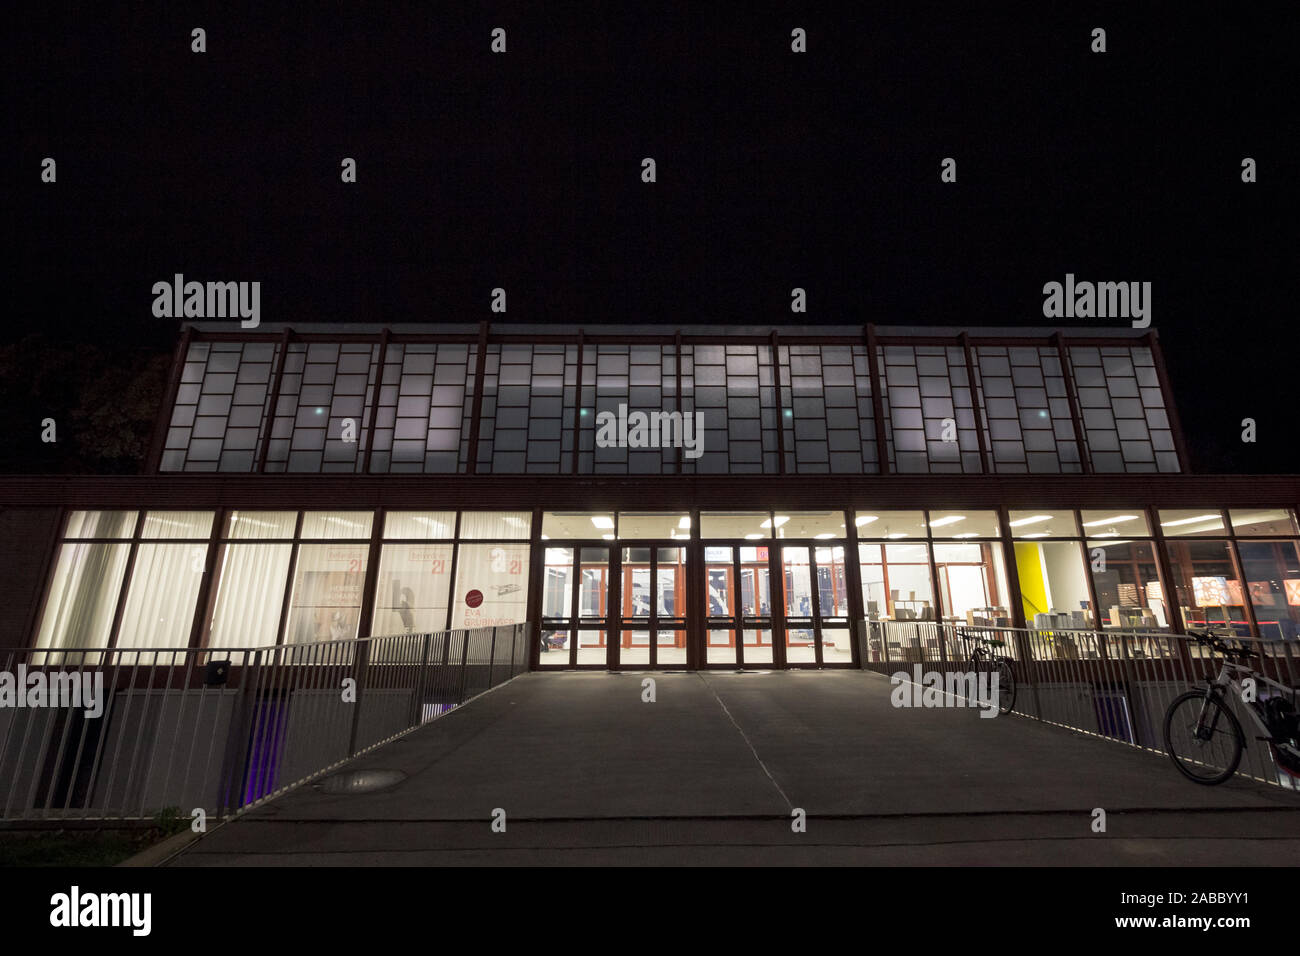 VIENNA, AUSTRIA - NOVEMBER 6, 2019: 21er Haus, also called Belvedere 21 museum, taken at night. Belvedere 21 is a contemporary art museum in the cente Stock Photo